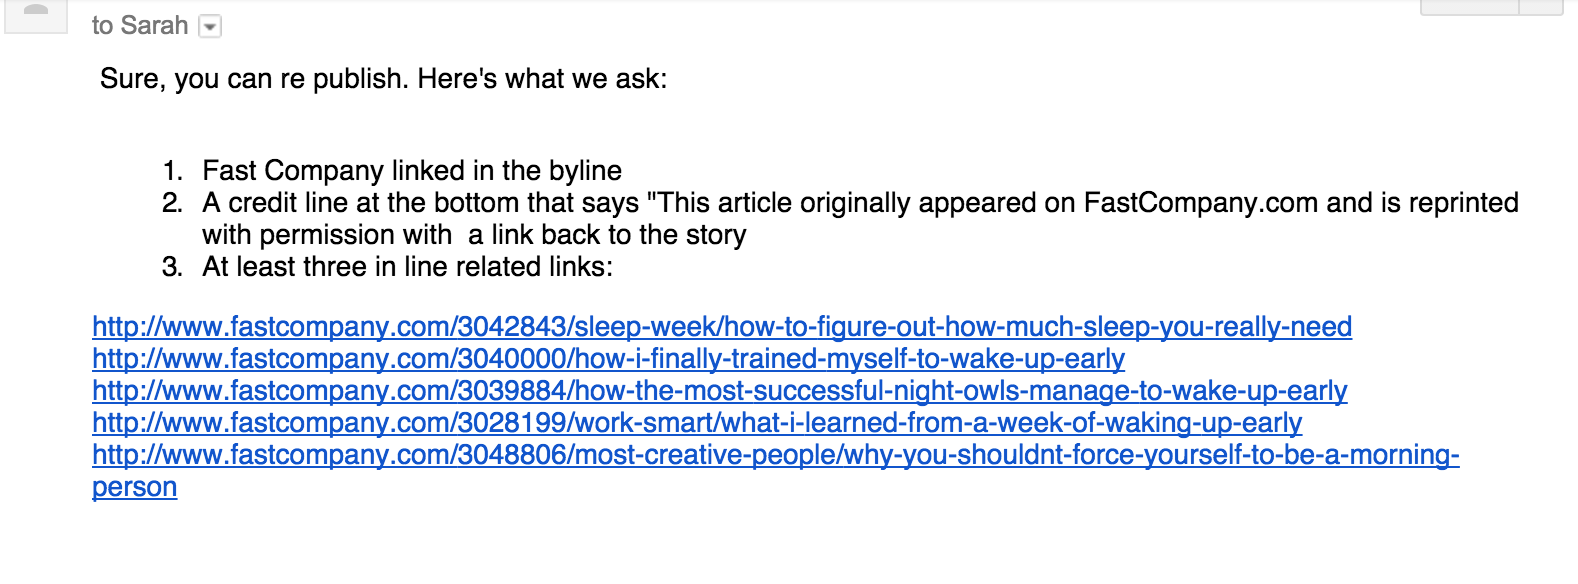 Screenshot showing an email sent by FastCompany about republishing